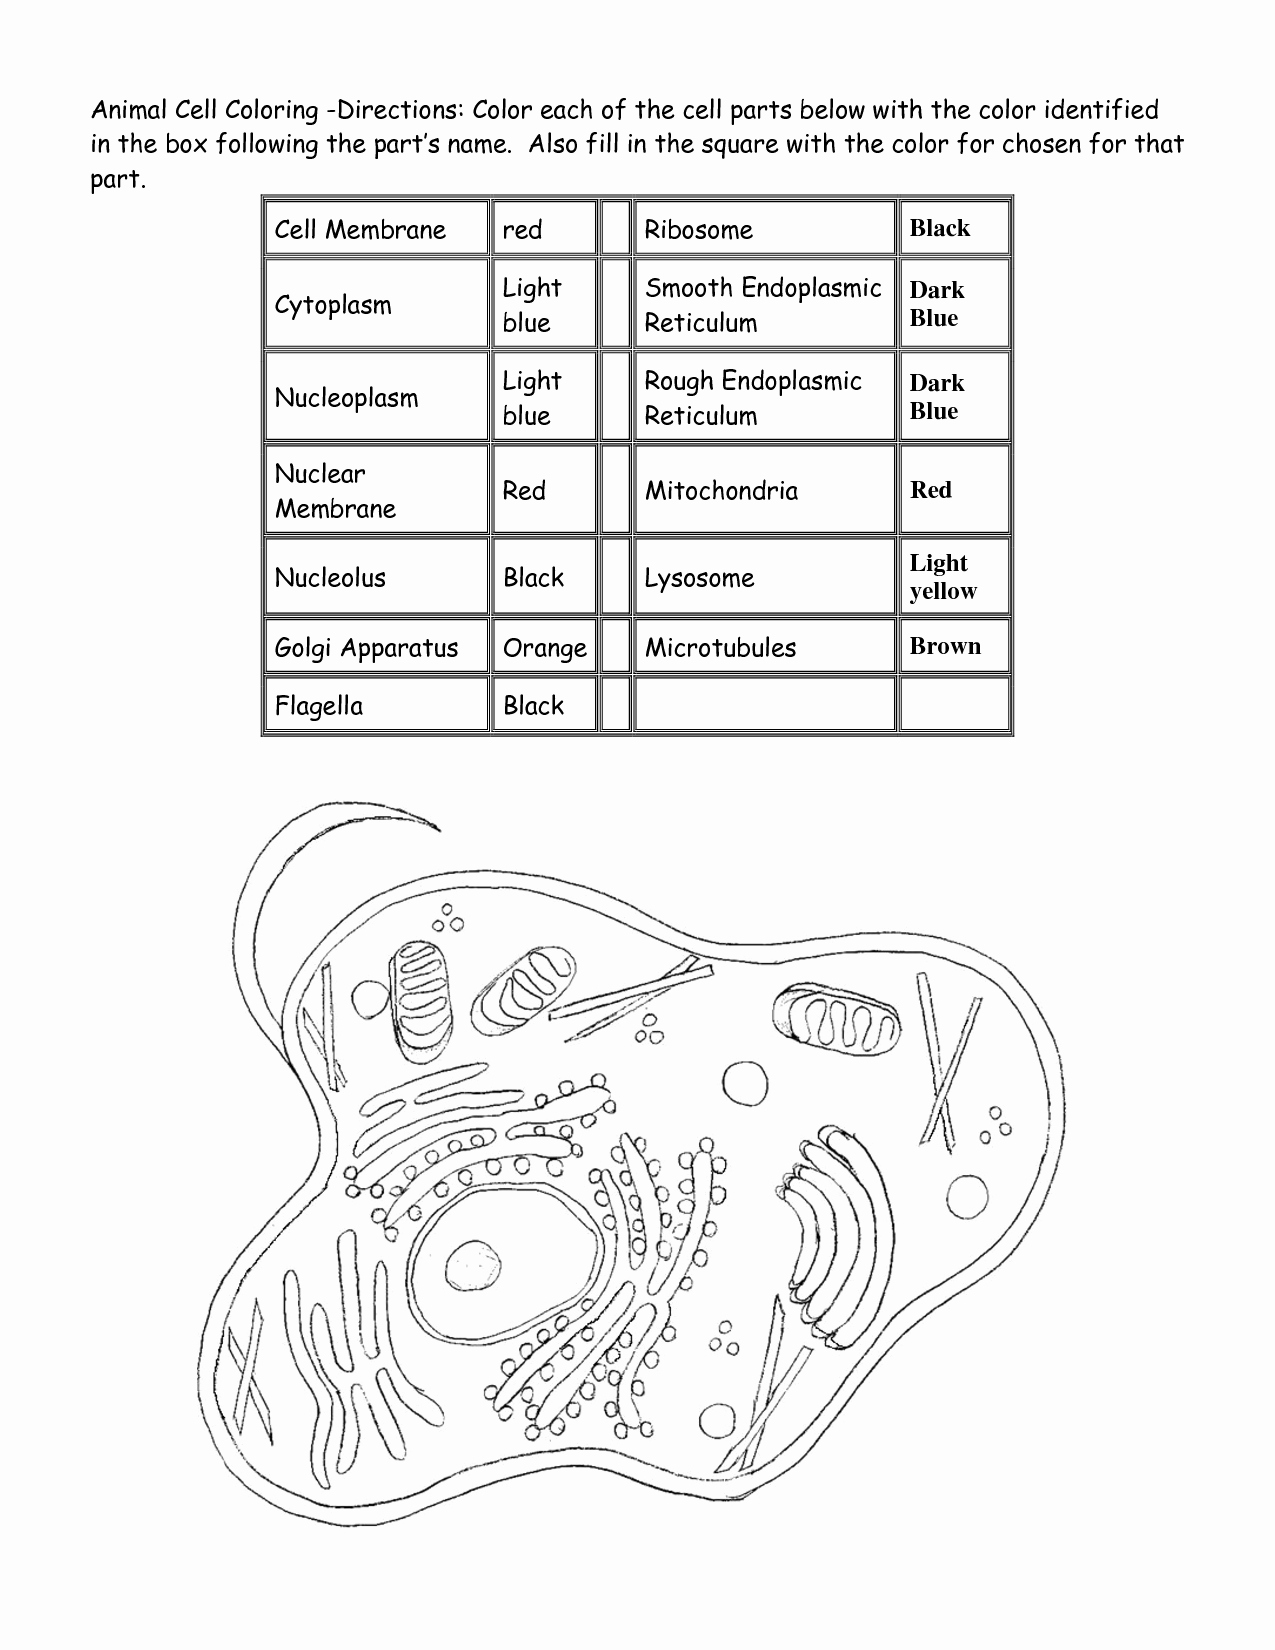 Animal Cell Coloring Worksheet Lovely Animal Cell Coloring Page Coloring Home